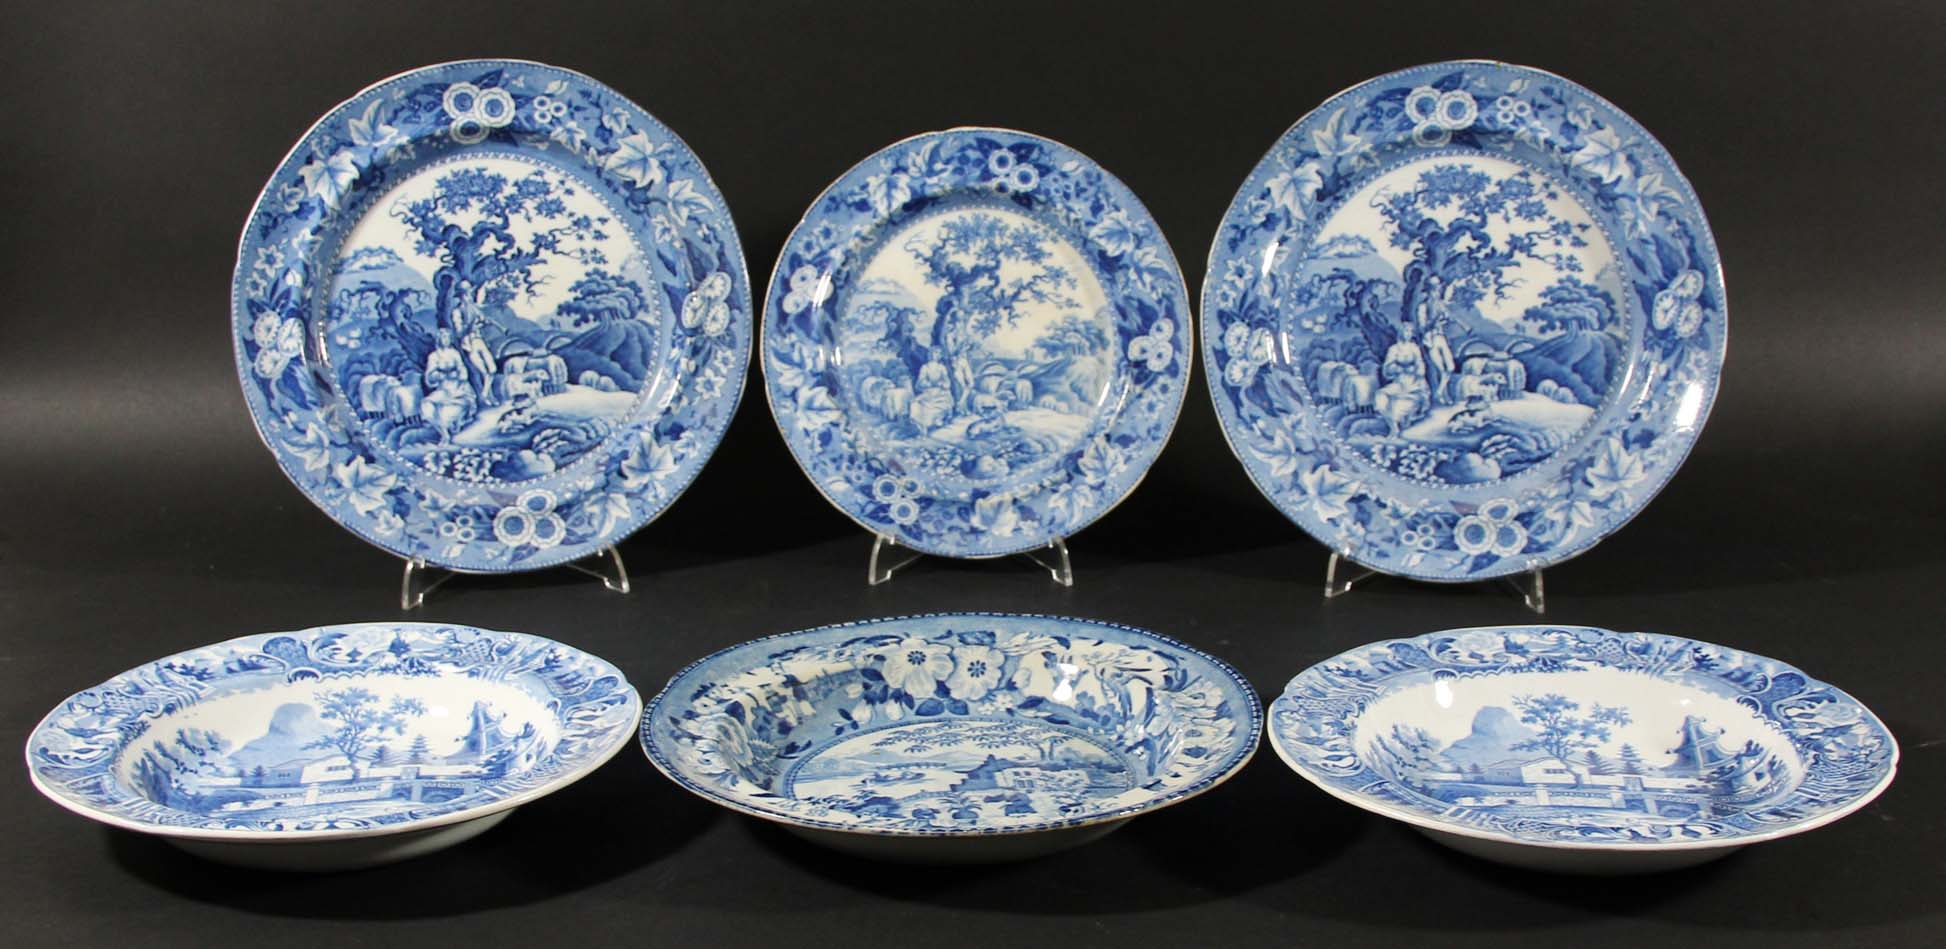 THREE BLUE TRANSFER PRINTED PLATES, early 19th century, in the Piping Shepherd pattern, diameter